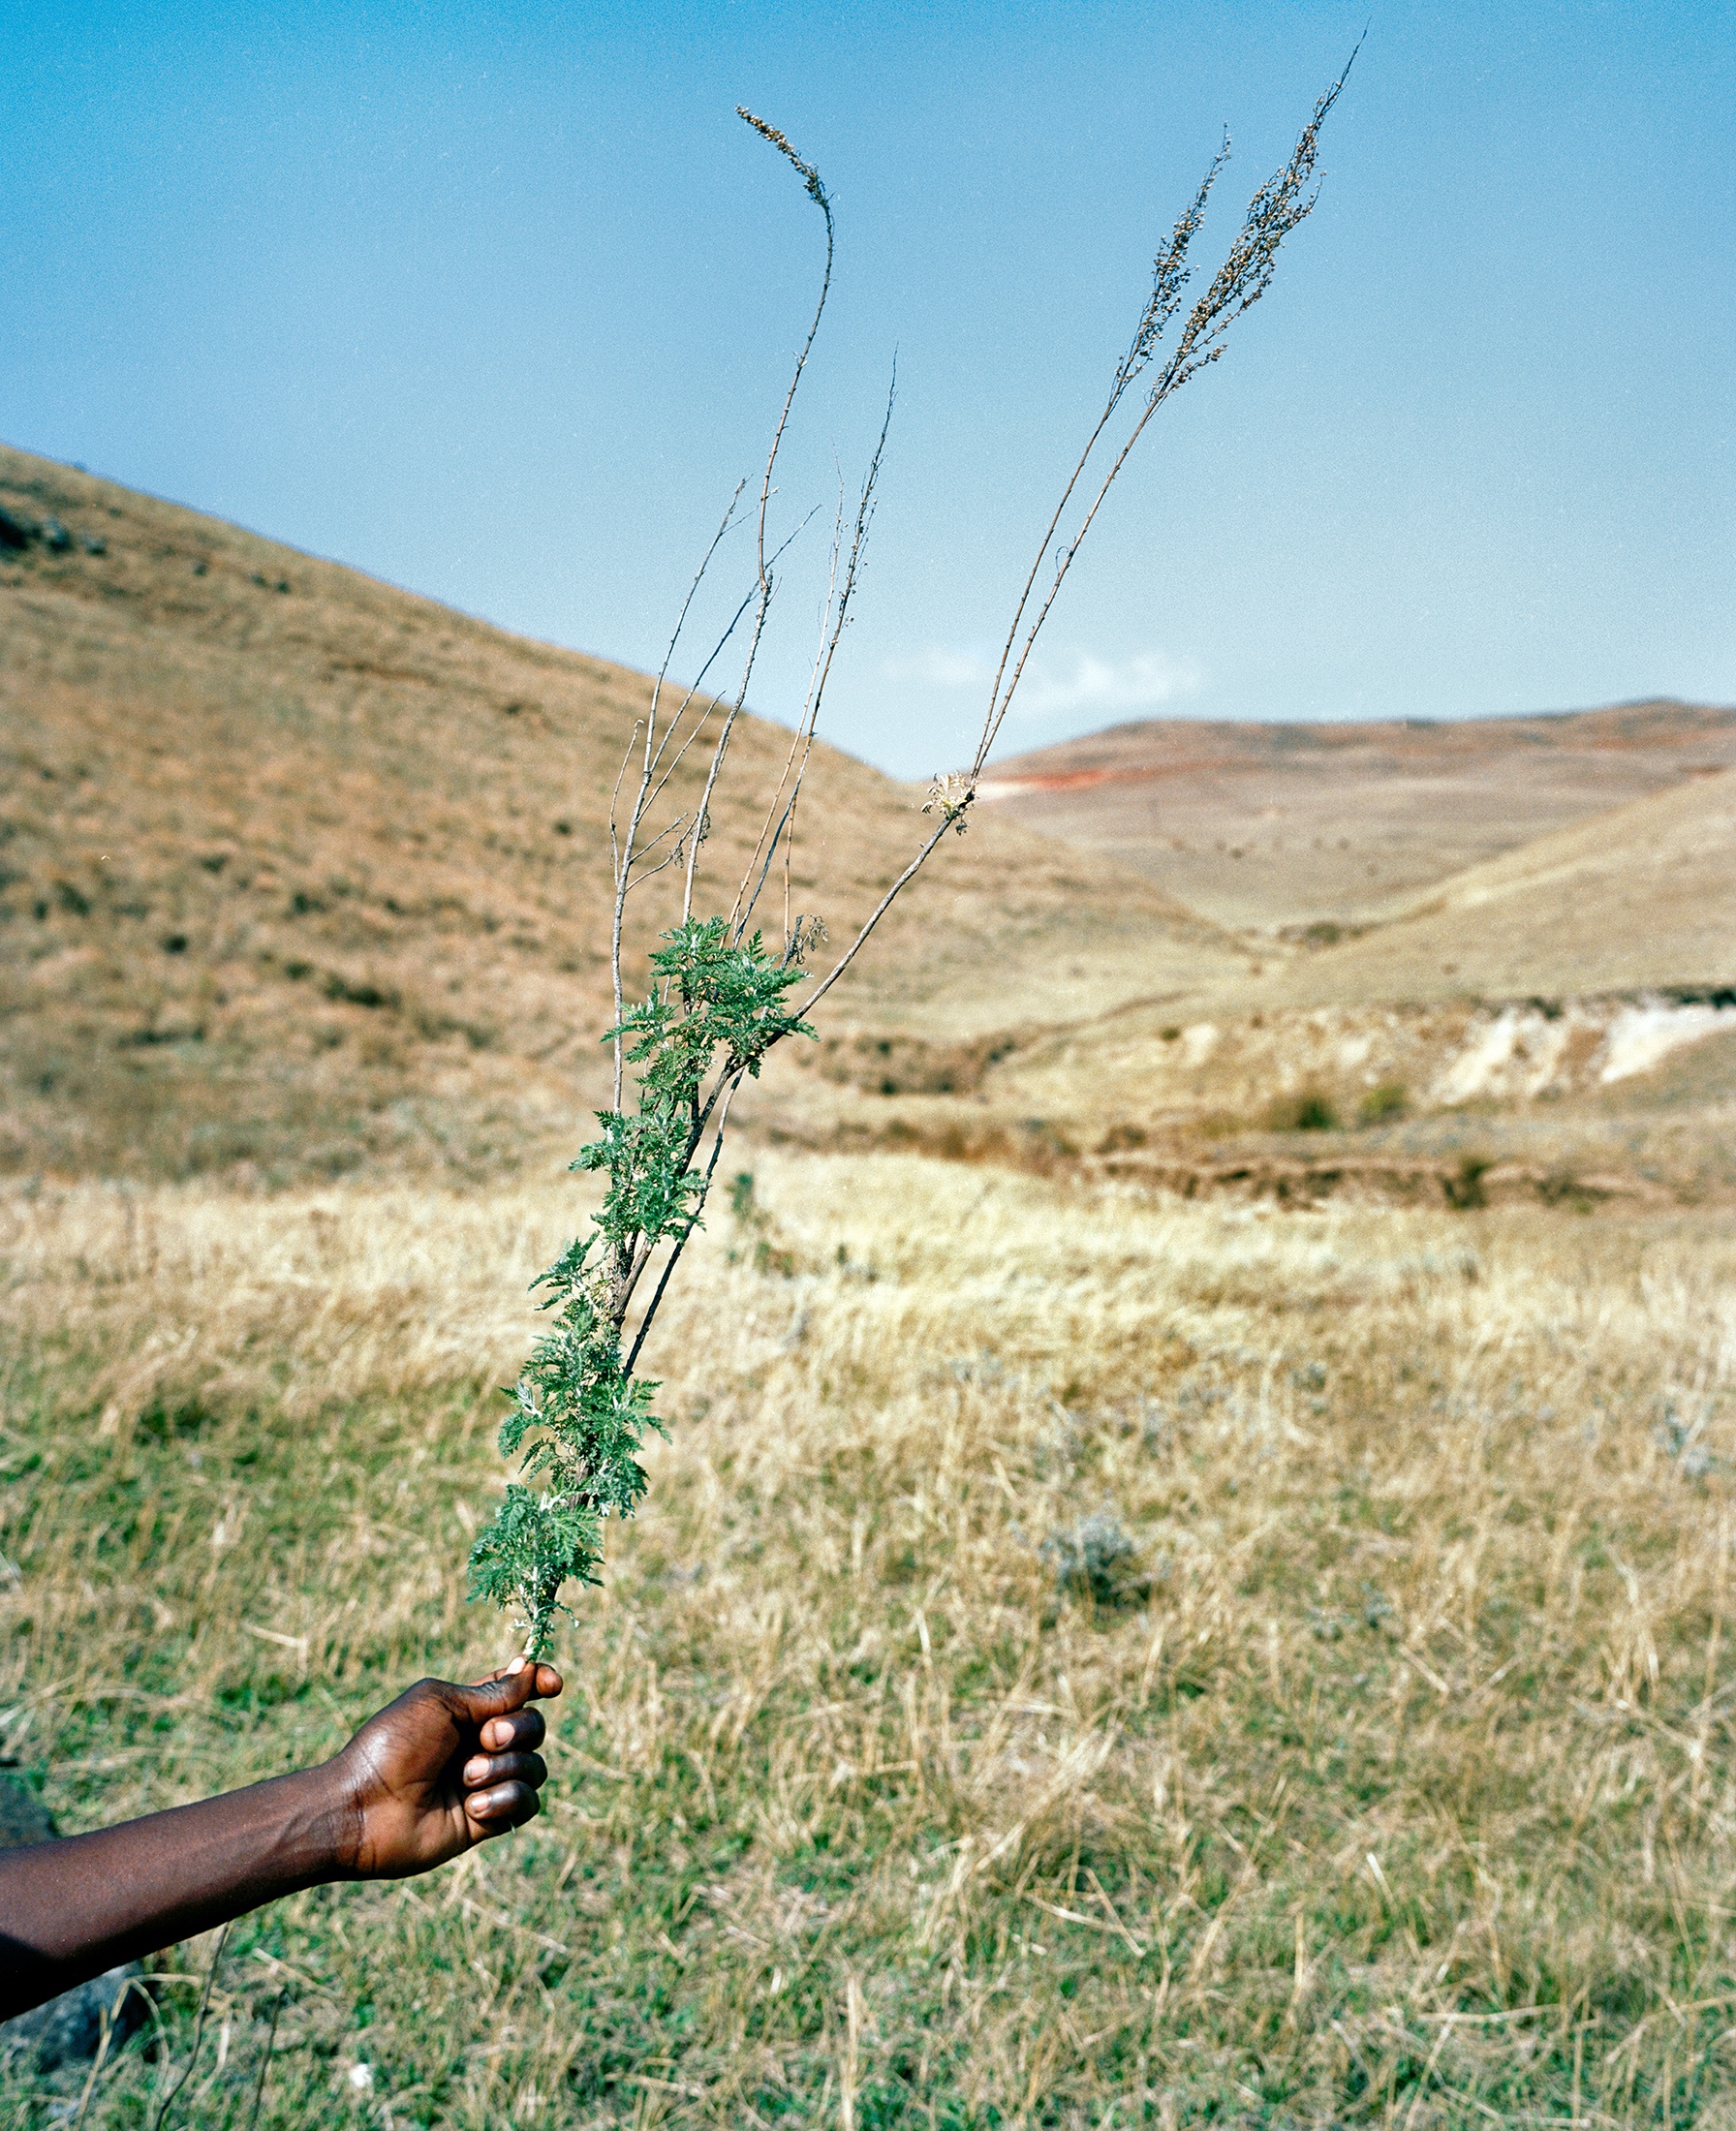 Lindokuhle Sobekwa's photograph 'Mhlonyane' shows a hand holding a small branch against a backdrop of a grassy hillside.
